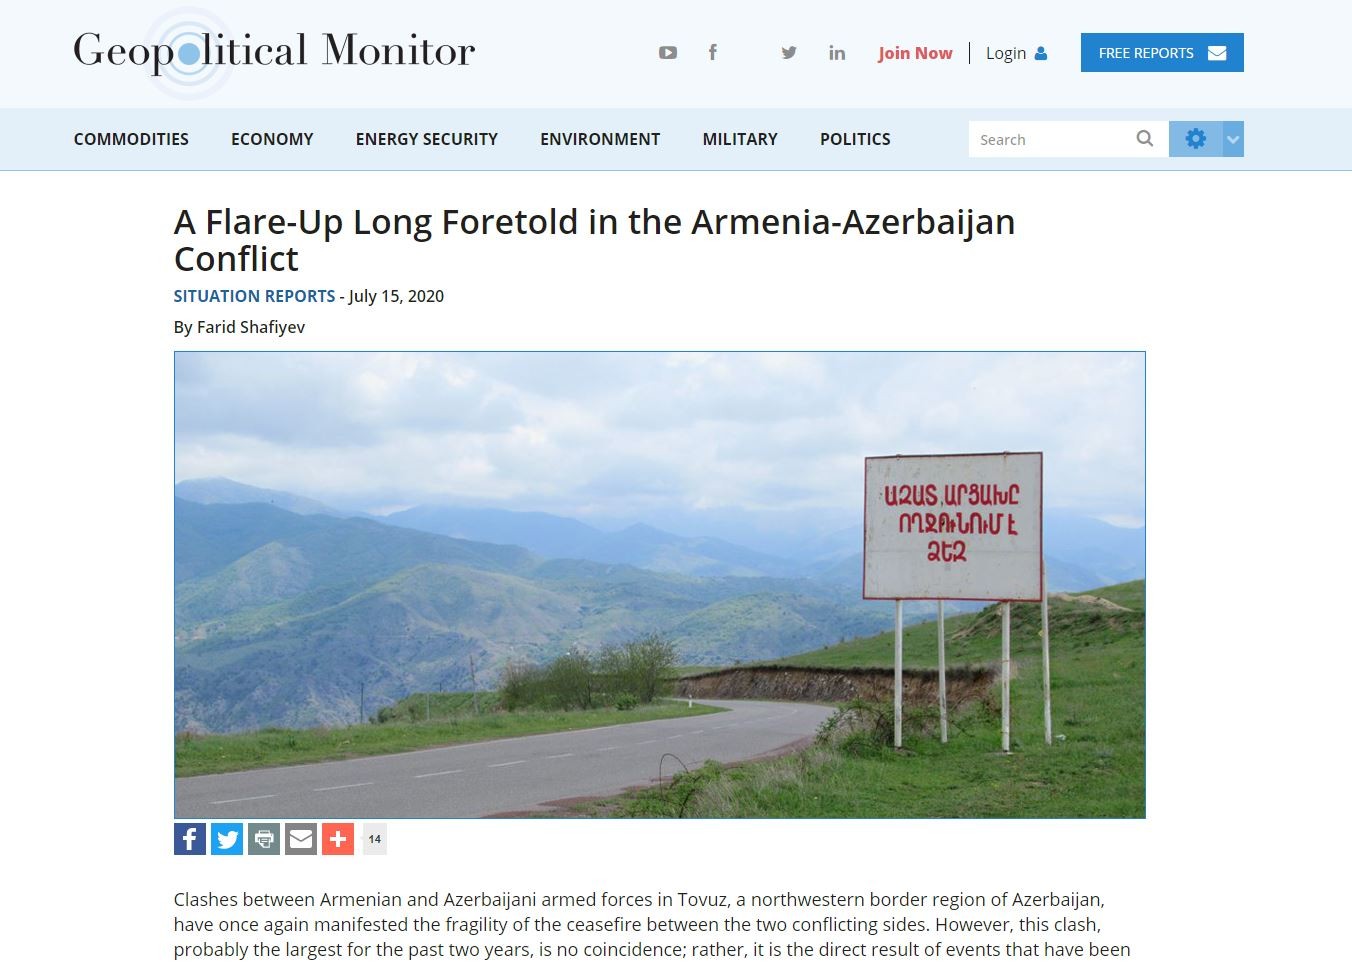 A Flare-Up Long Foretold in the Armenia-Azerbaijan Conflict